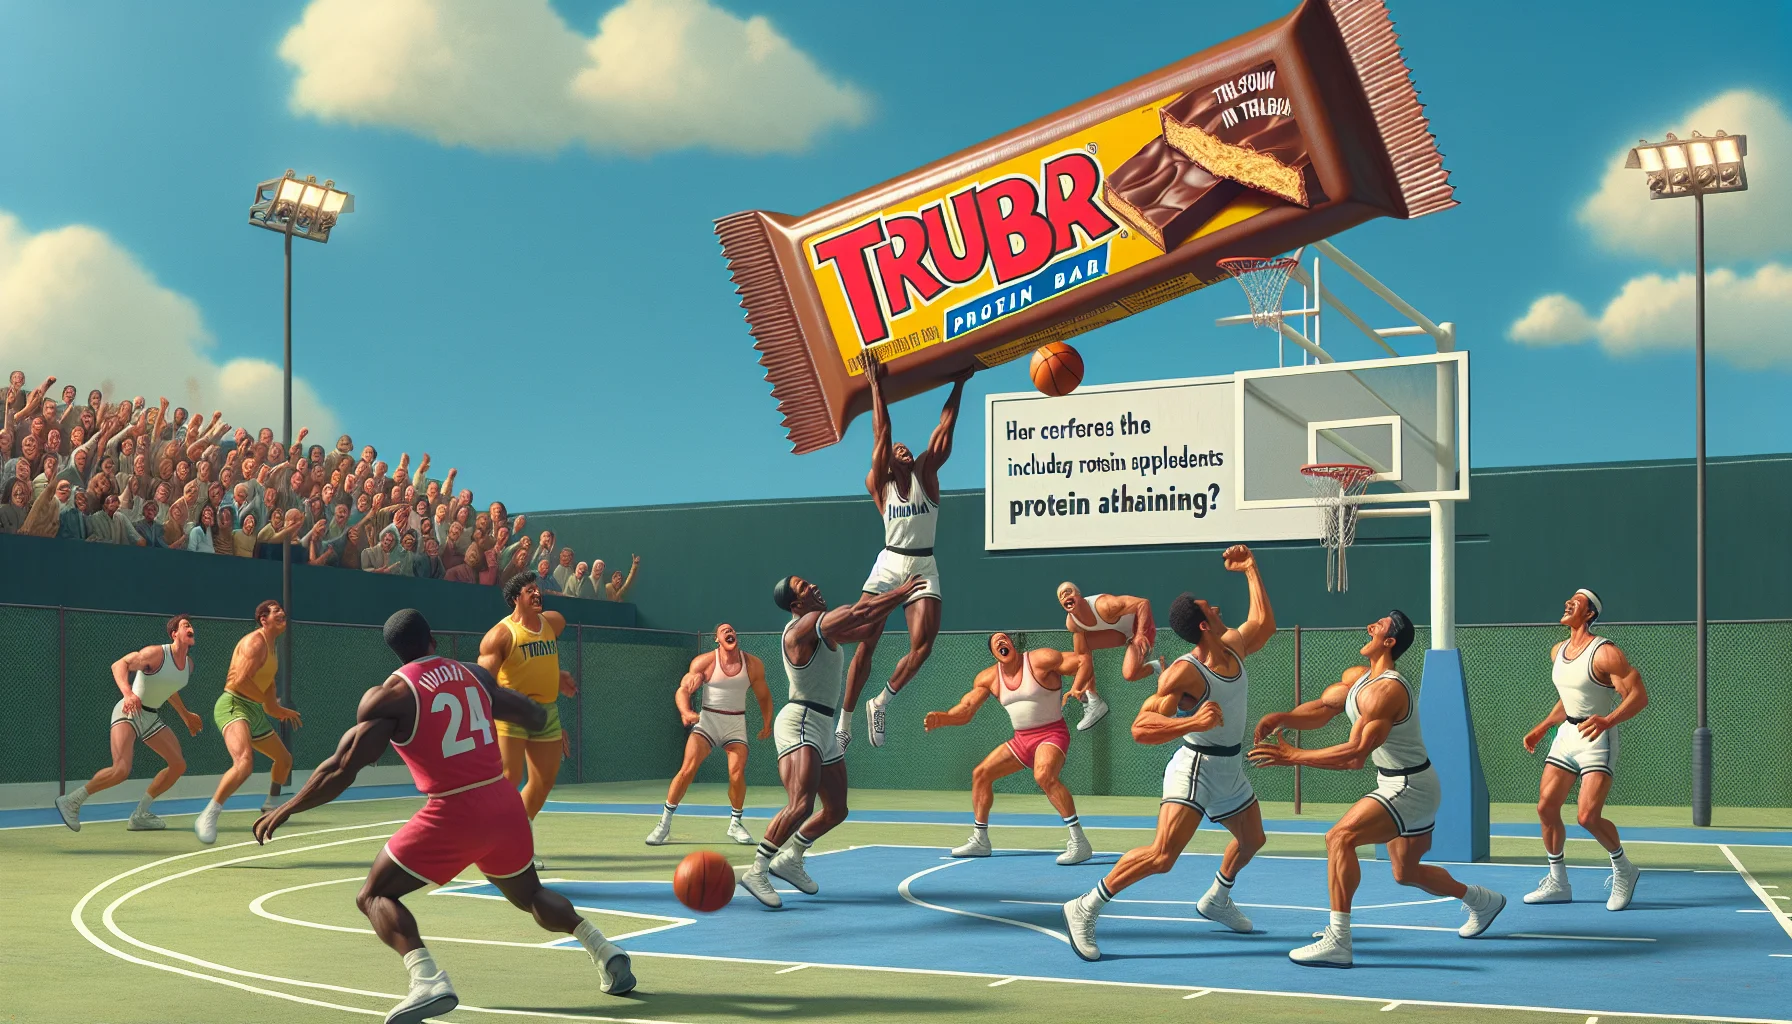 Imagine a humorous scene where Trubar protein bars are being used in an unexpected, sports-related context. Picture a basketball game, where instead of the usual ball, a giant Trubar protein bar is being tossed around the court. Athletes, of various descents and gender such as Hispanic male, Black female, Middle-Eastern male, and South-Asian female, are trying to score goals with it, laughing and straining at the same time. The audience is in splits, cheering on, while a billboard in the background promotes the benefits of including protein supplements into athletic training.